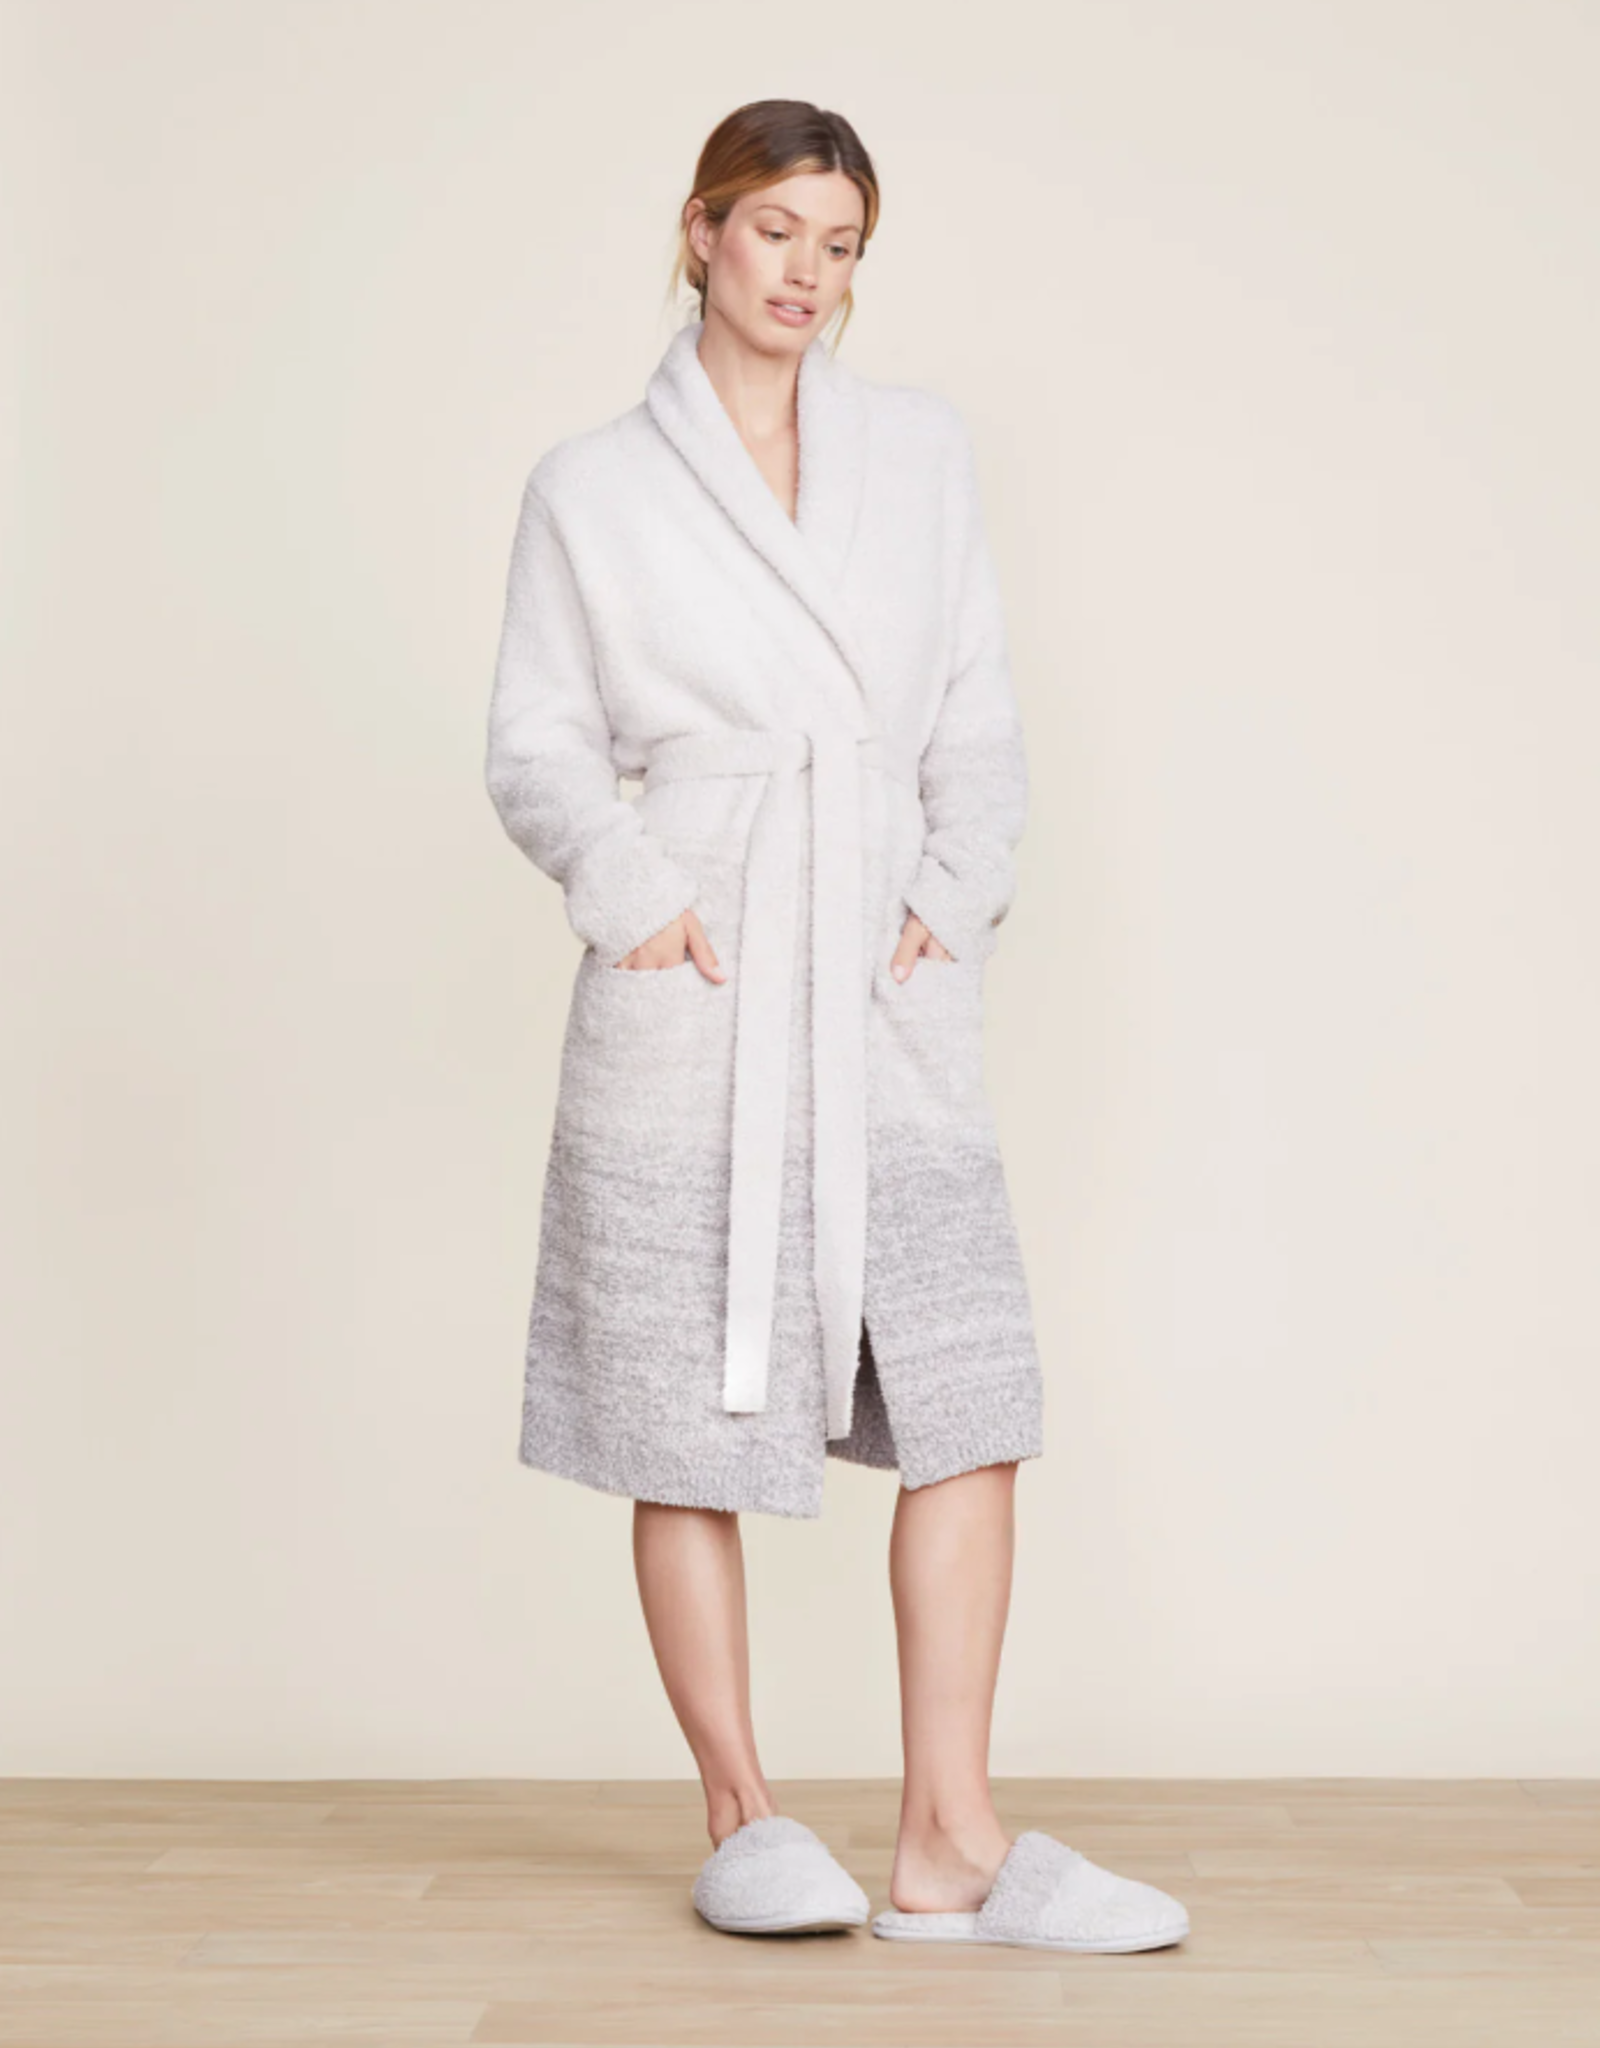 Barefoot Dreams CozyChic Heathered Ombre Robe | Almond Multi |